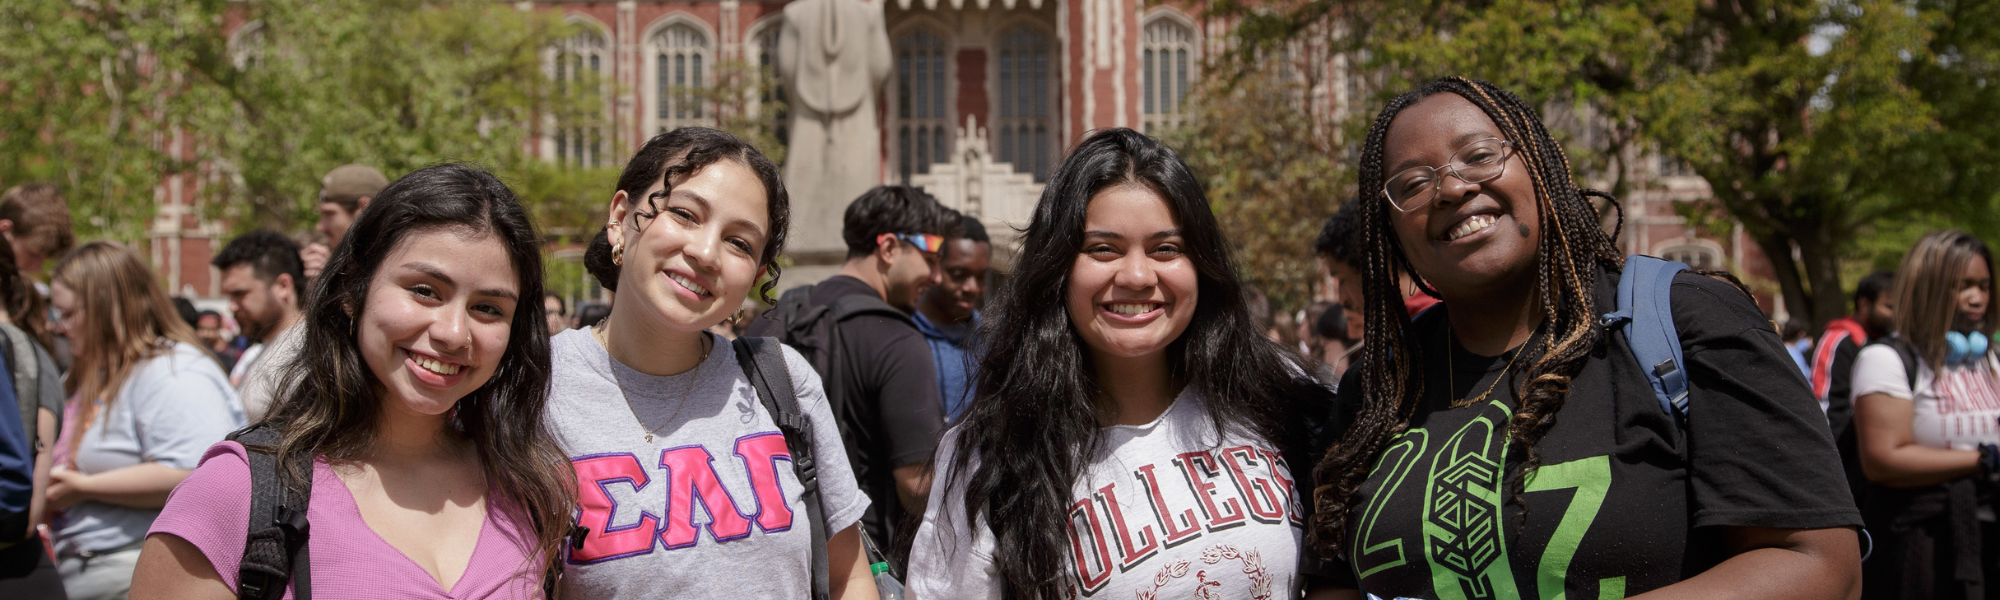 A group photo of students smiling in front of the Bizzell Memorial Library